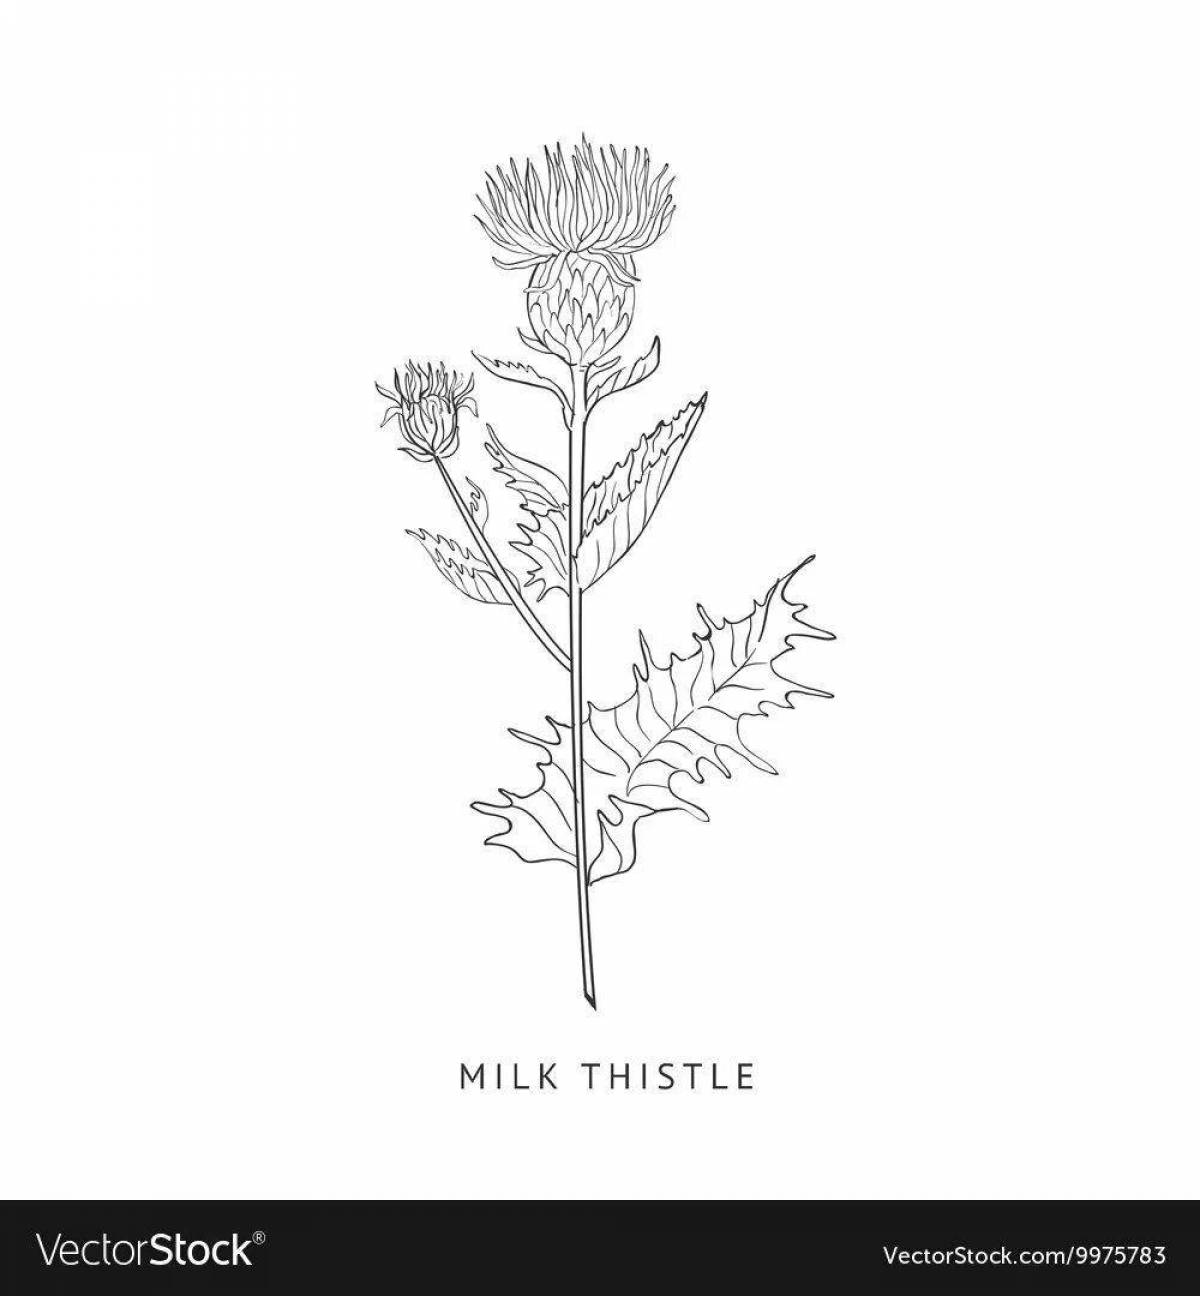 Dazzling thistle coloring page